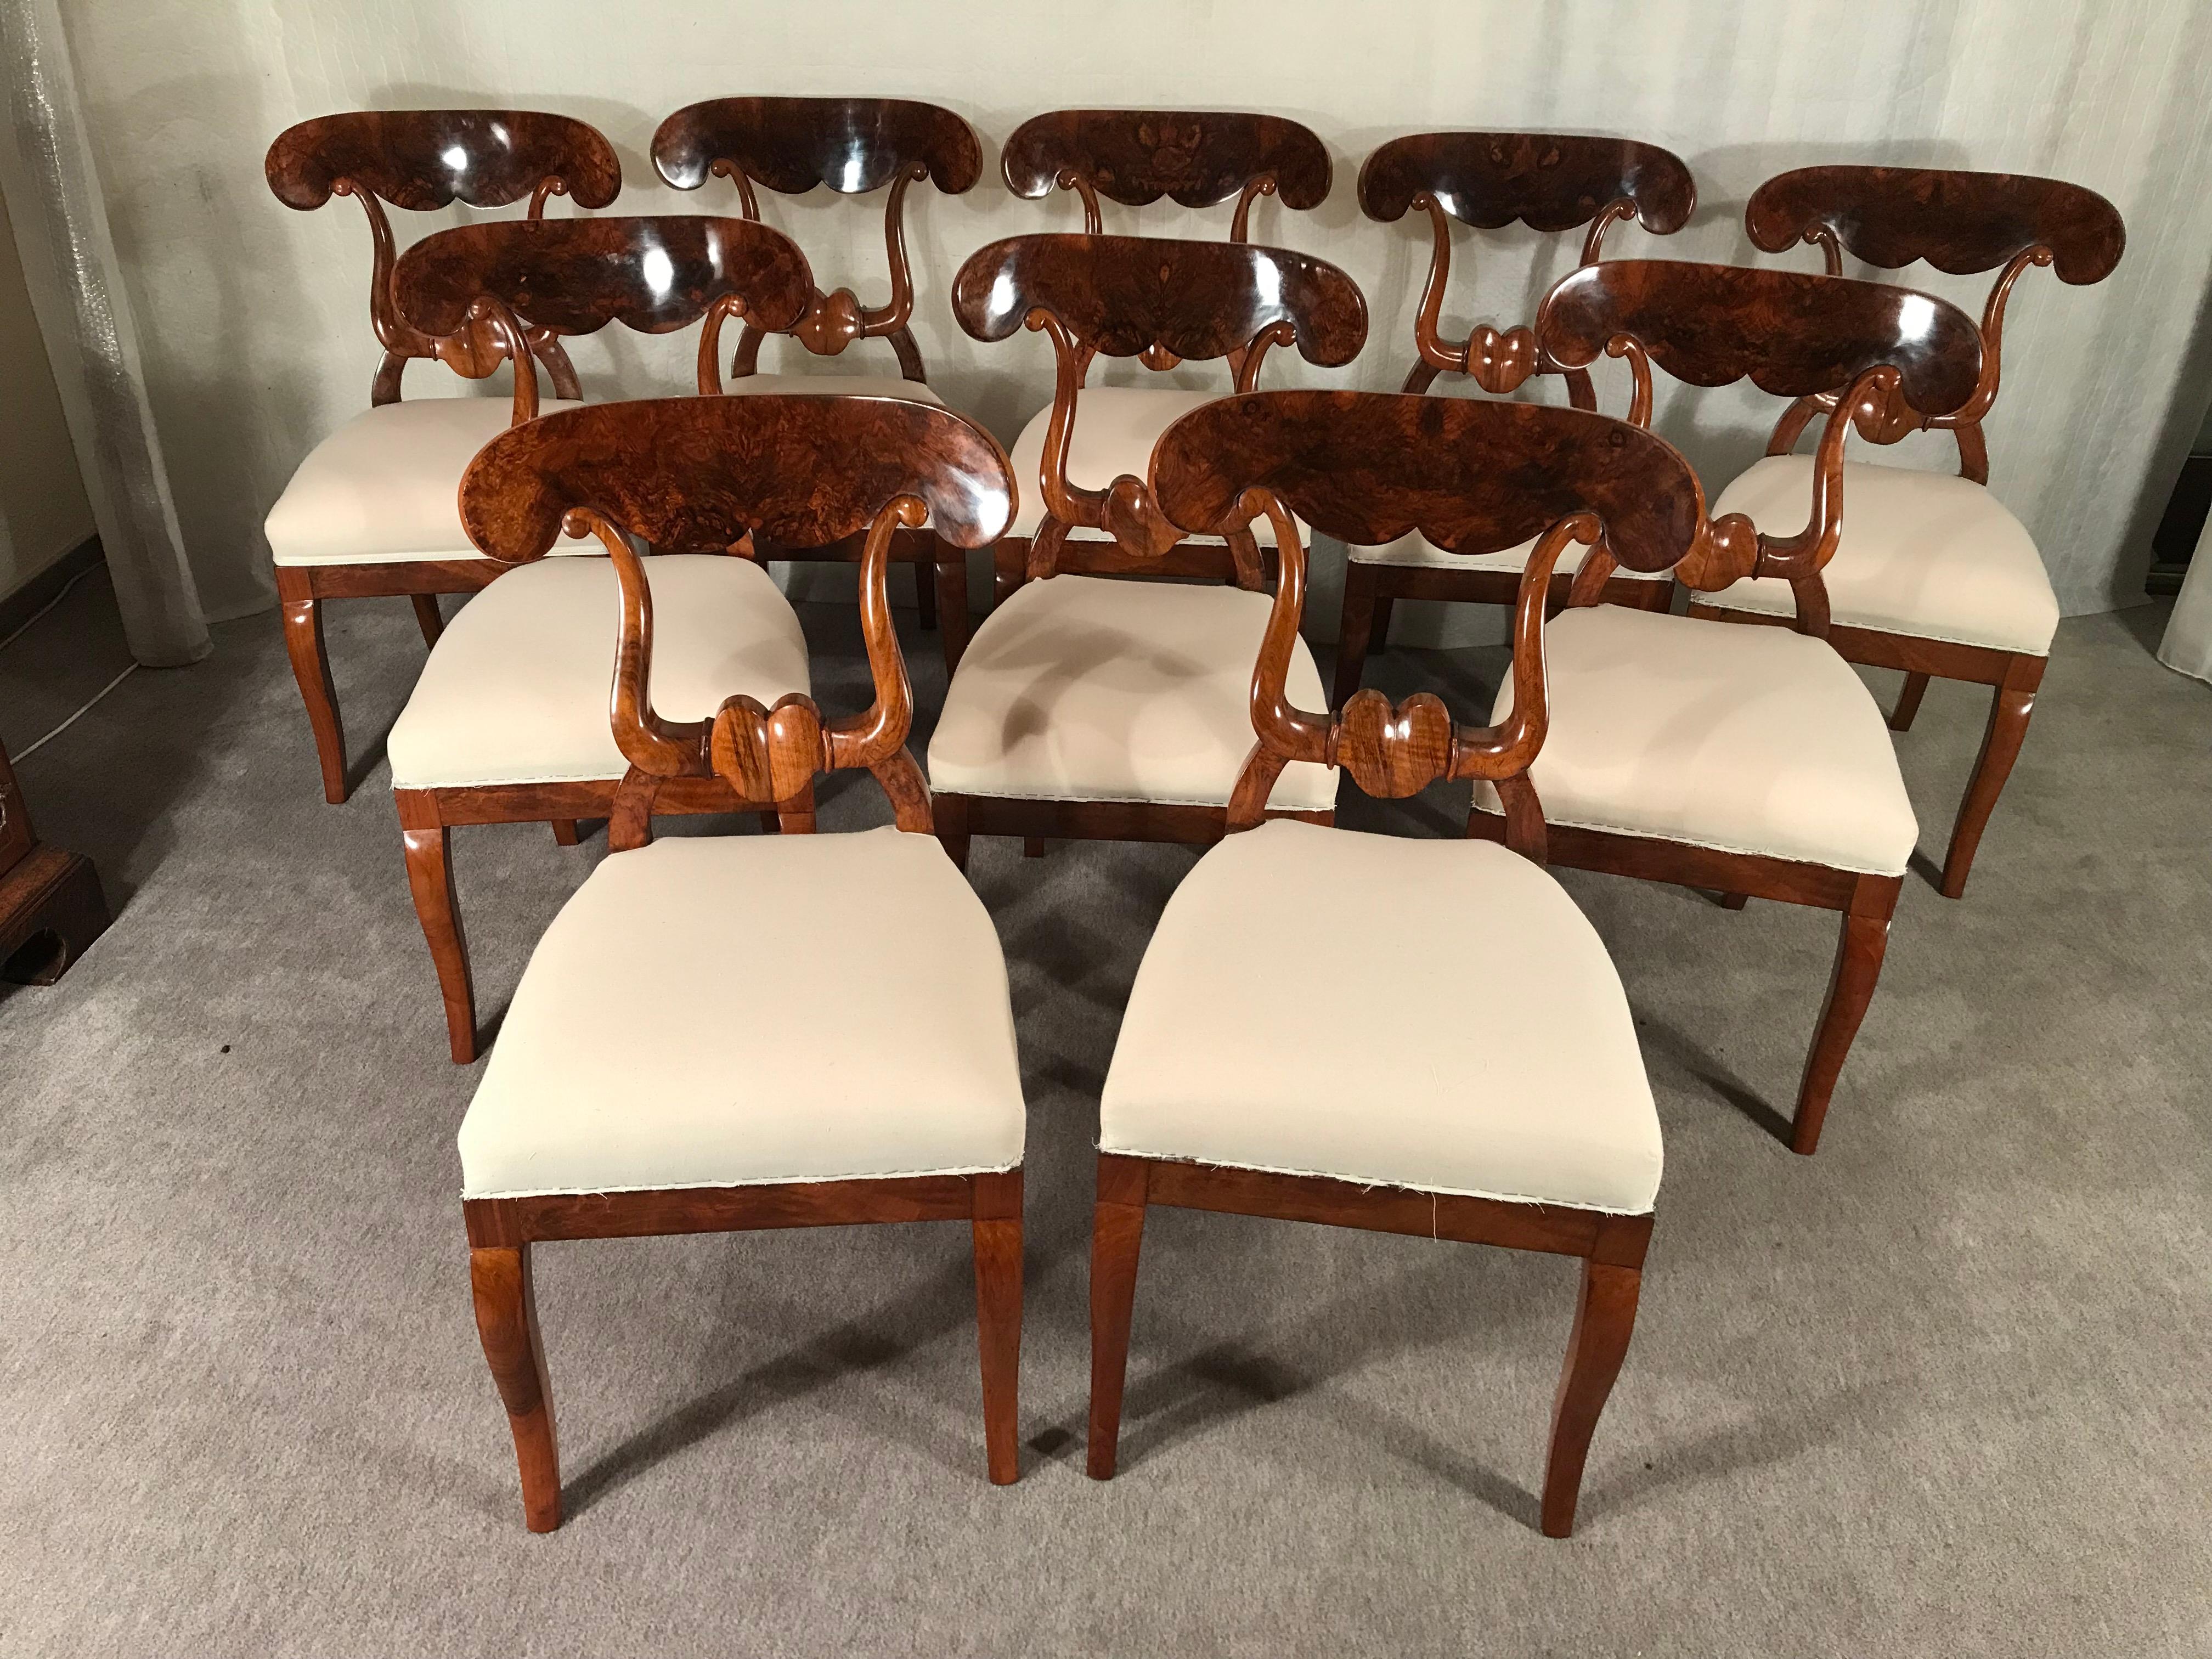 This exquisite set of 10 original Biedermeier chairs is a rare find. 
The so called original Biedermeier Ochsenkopf-Stuehle (ox-head chairs) get their name from their beautifully designed back. They date back to around 1820-30 and come from Southern